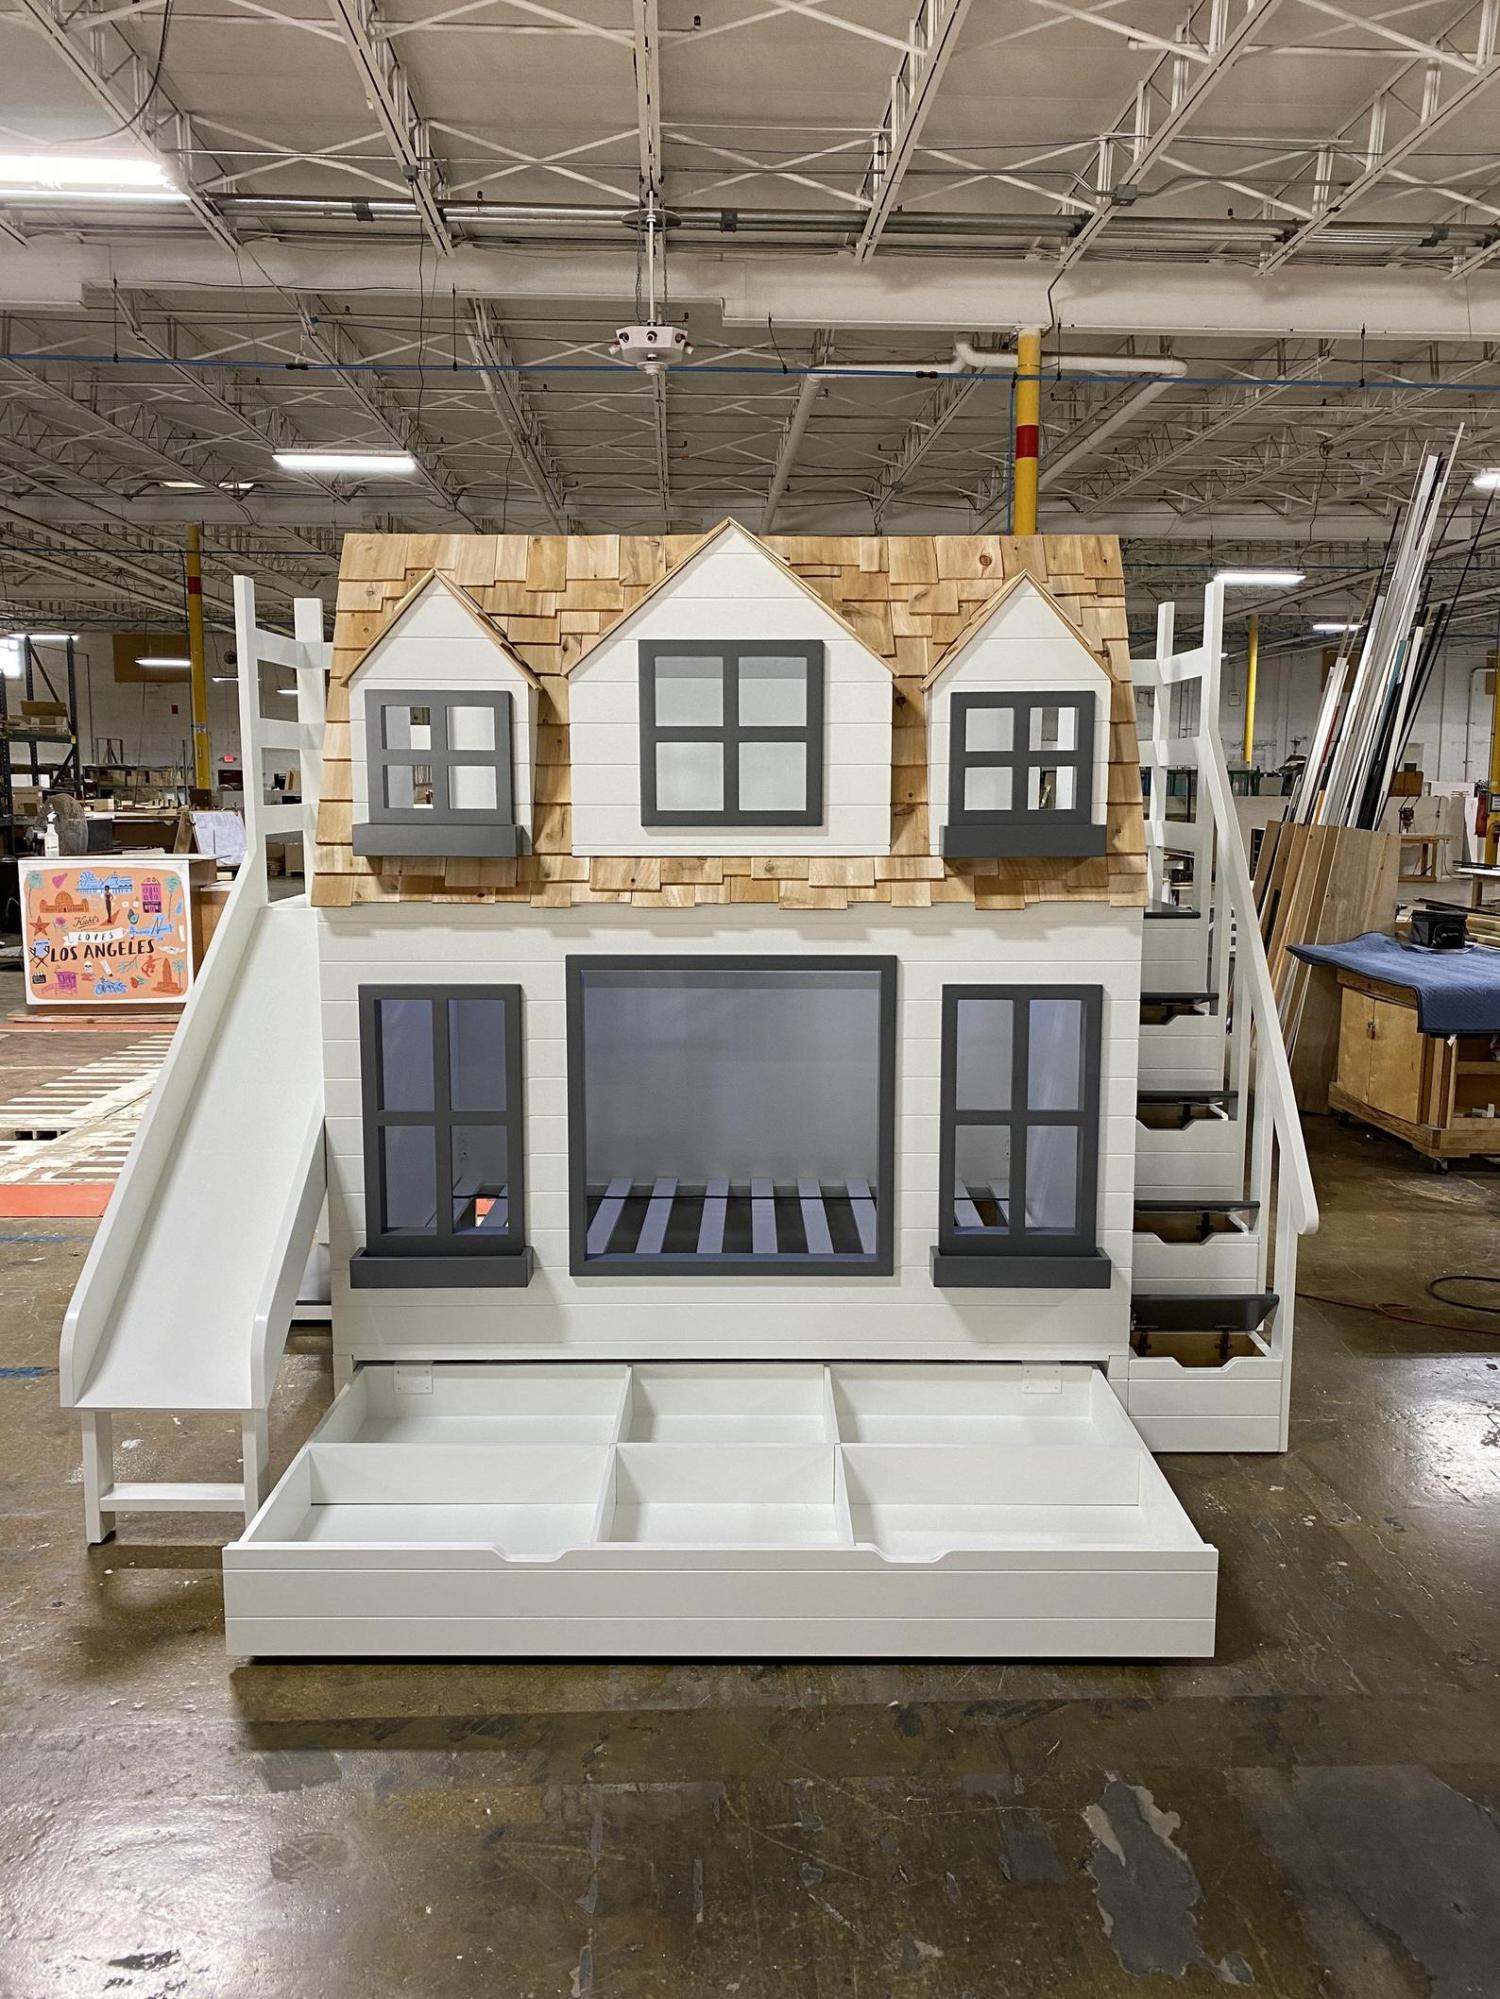 Giant doll house bunk bed - Country Cottage Bunk Bed